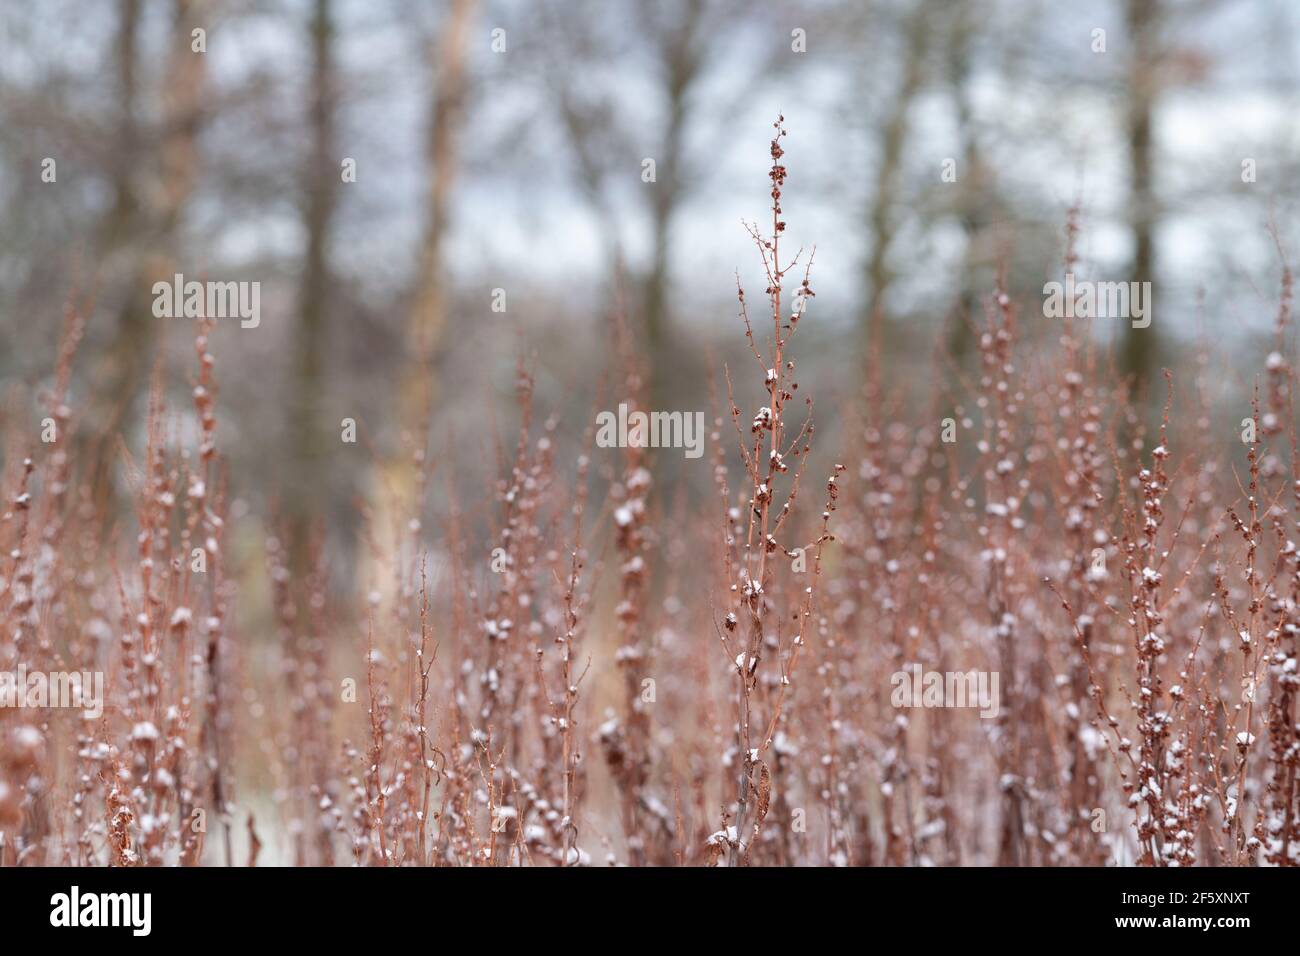 Stems of Broad-Leaved Dock (Rumex Obtusifolius) in Winter, Bearing Seeds and Sprinkled with Snow Stock Photo